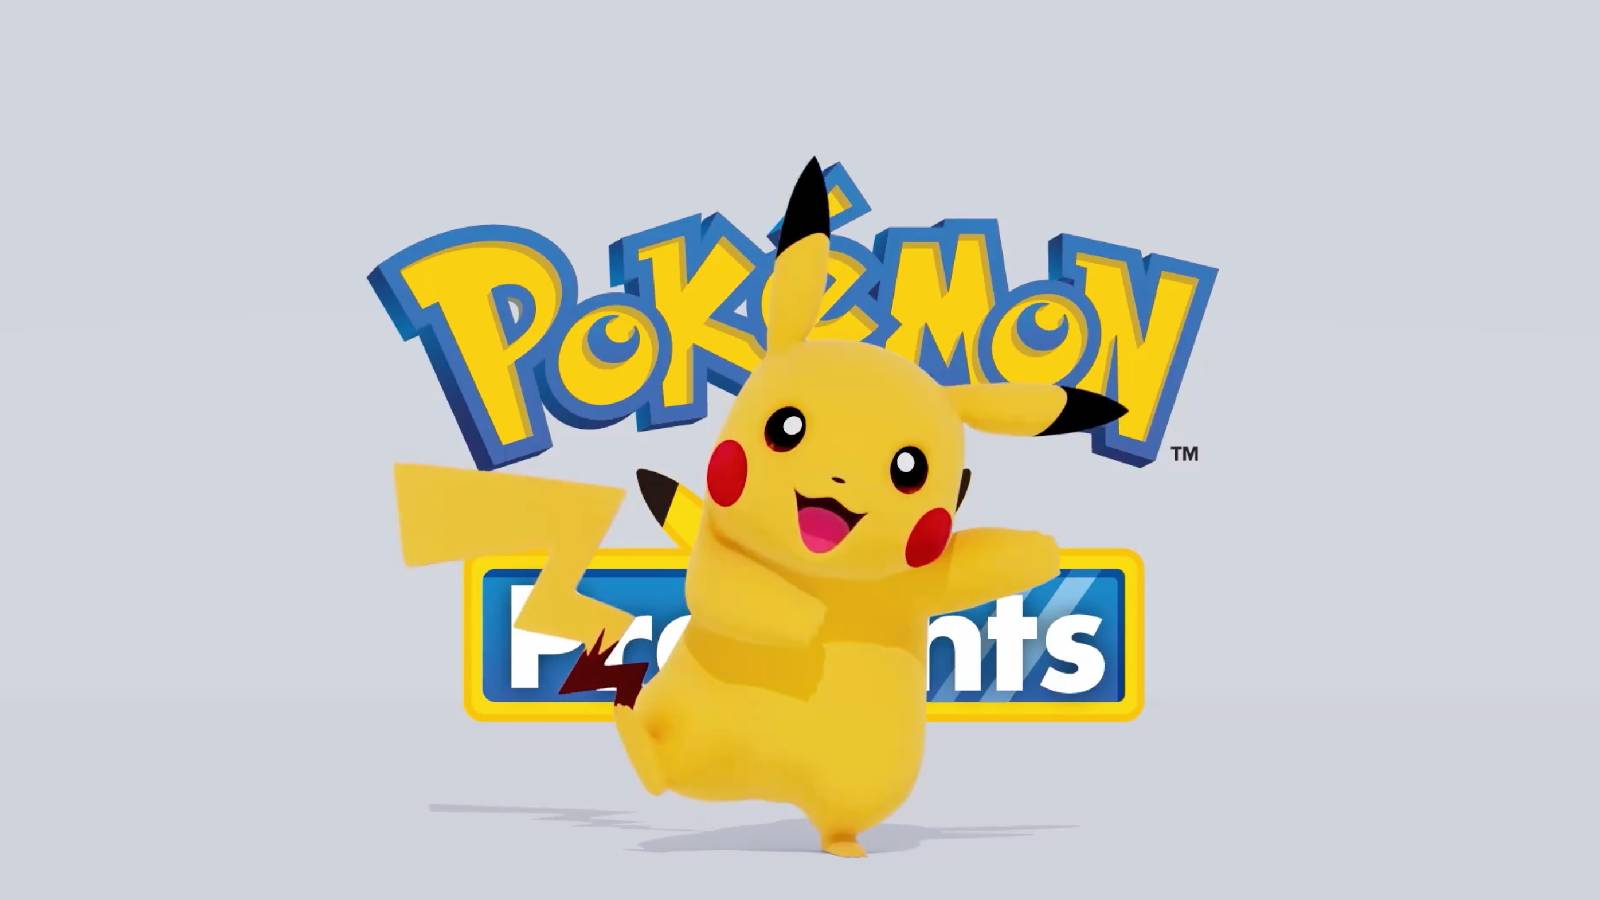 The POkemon Pikachu appears in front of the words 'Pokemon Presents"